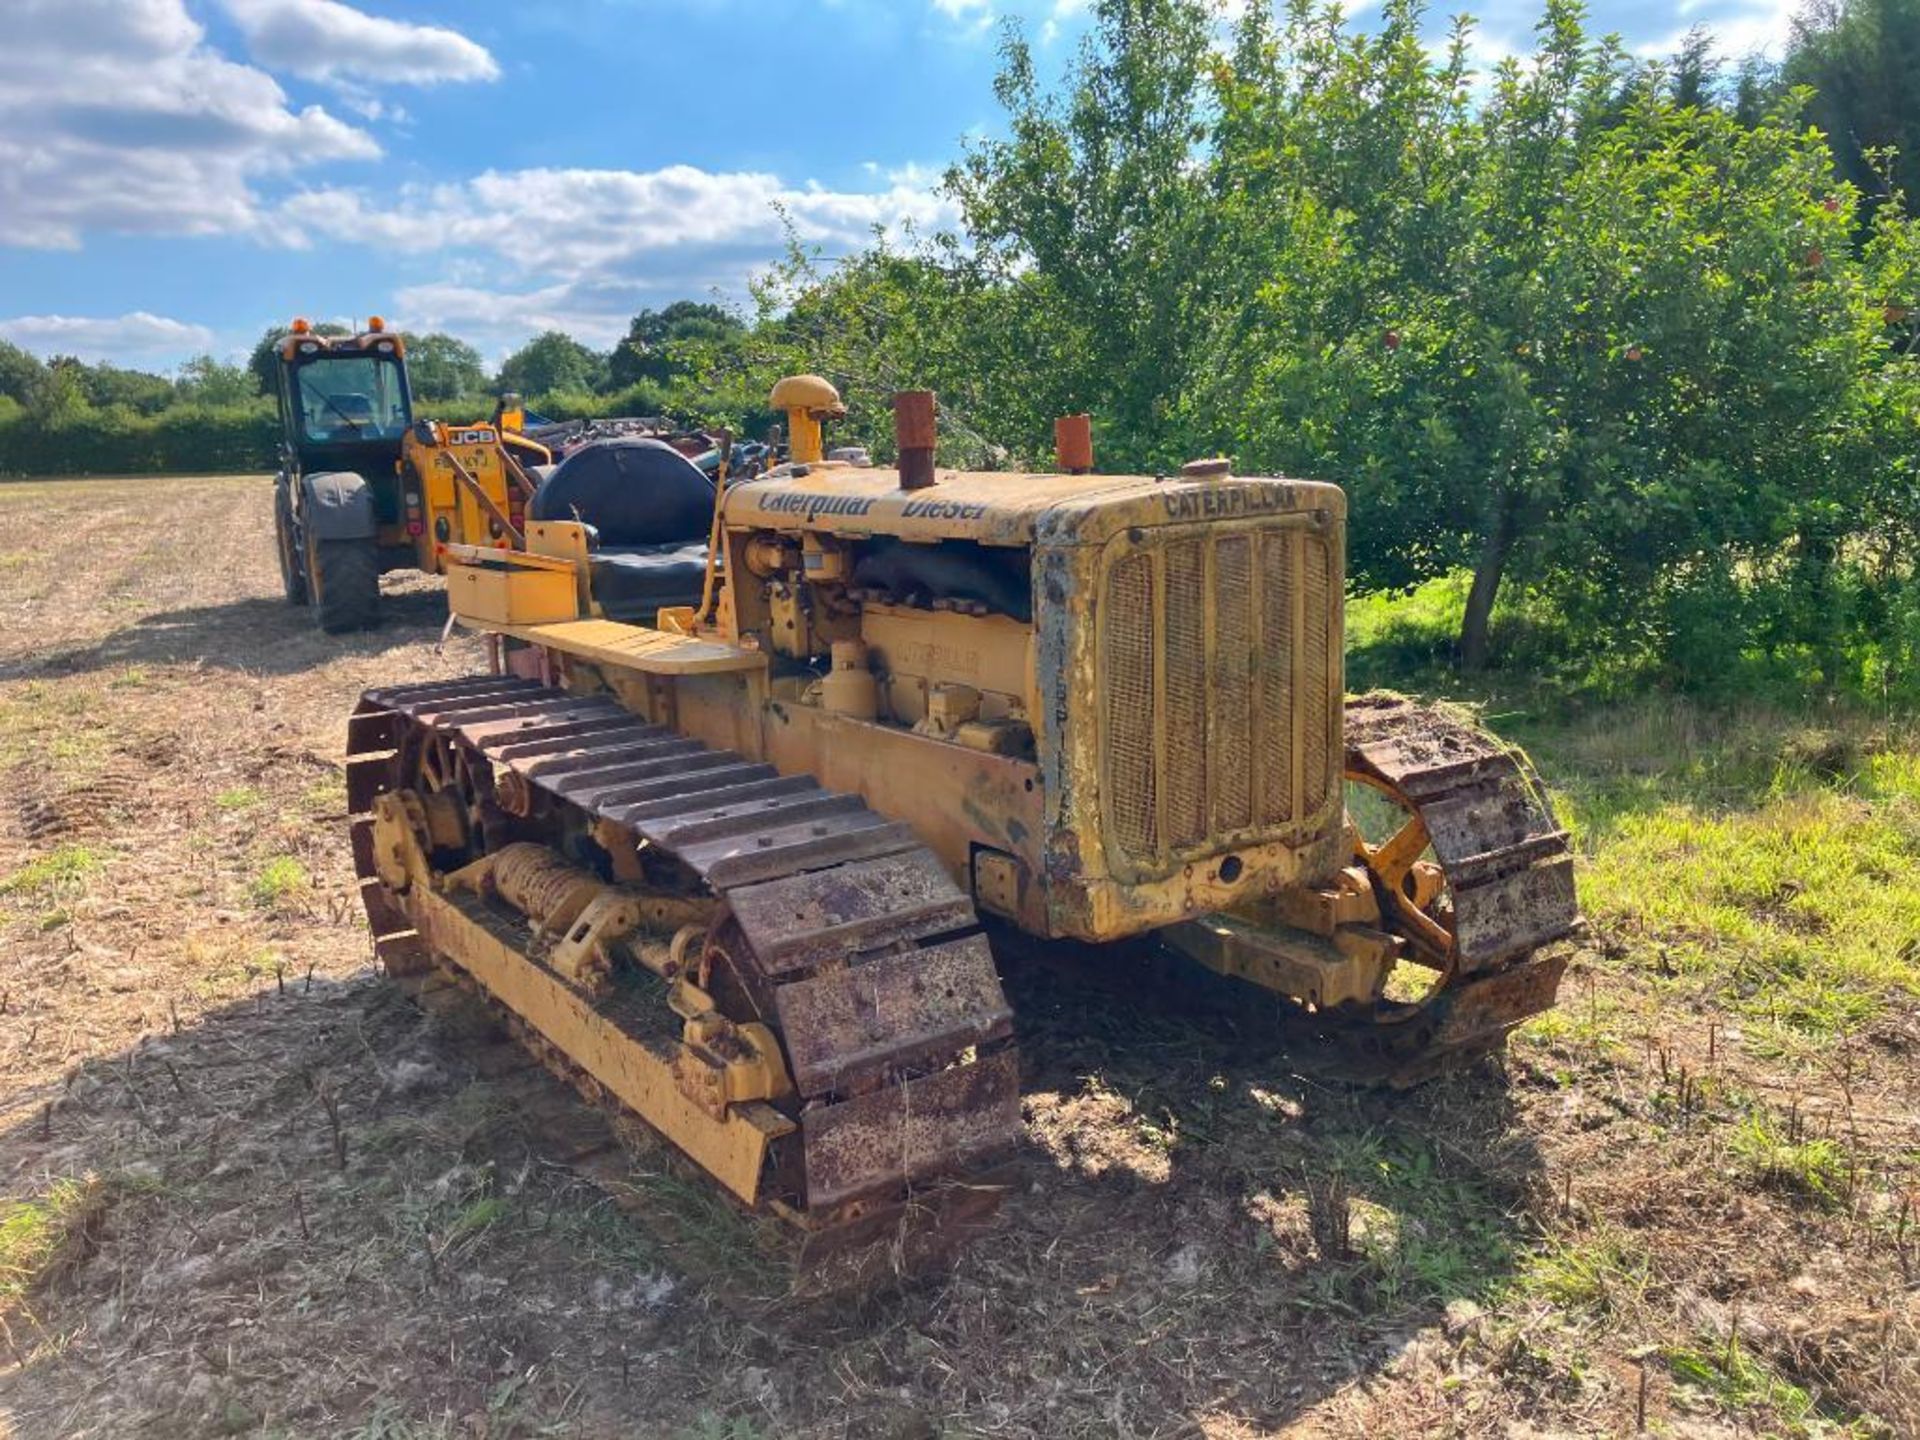 1949 Caterpillar D4 wide gauge metal tracked crawler with 16" tracks , swinging drawbar and rear cab - Image 2 of 18